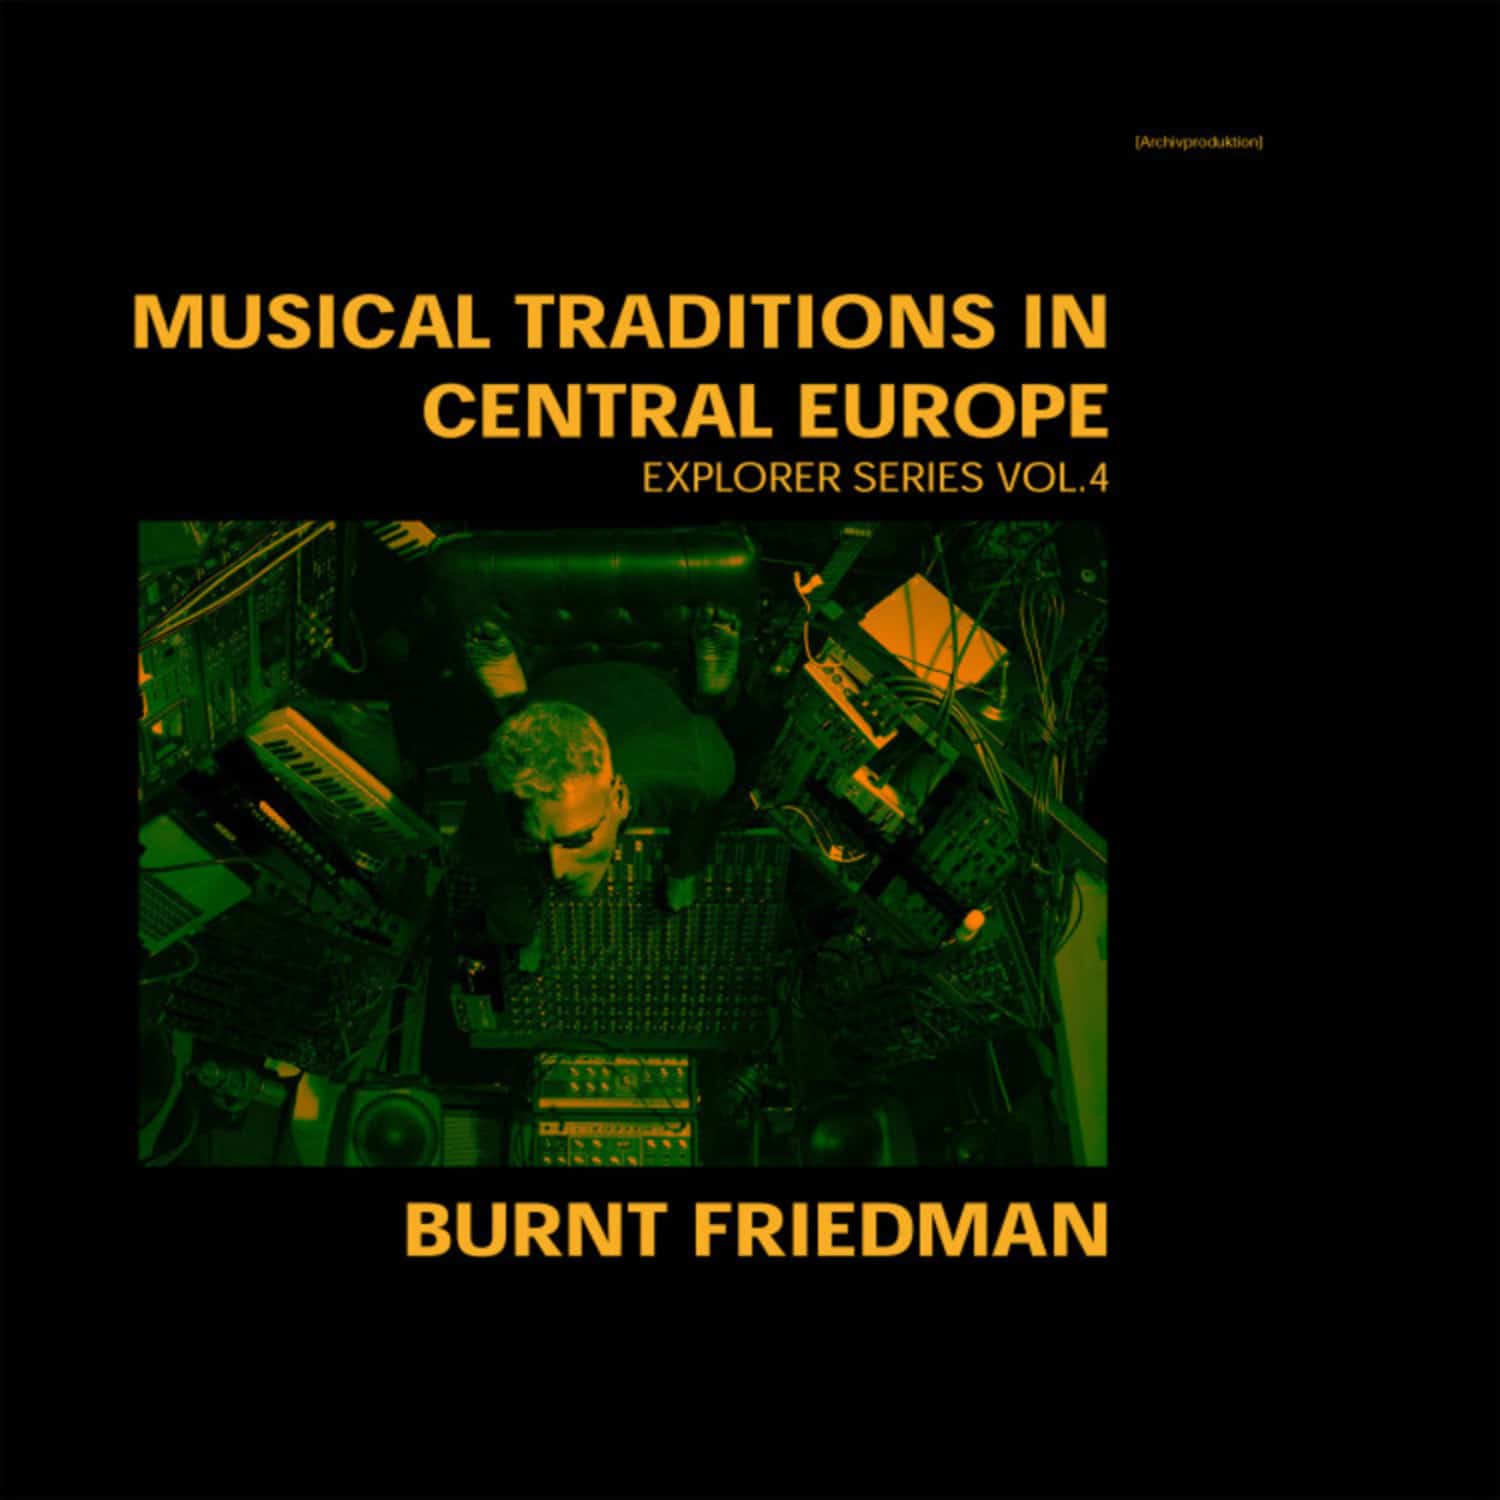 Burnt Friedman - MUSICAL TRADITIONS IN CENTRAL EUROPE, EXPLORER SERIES VOL.4 